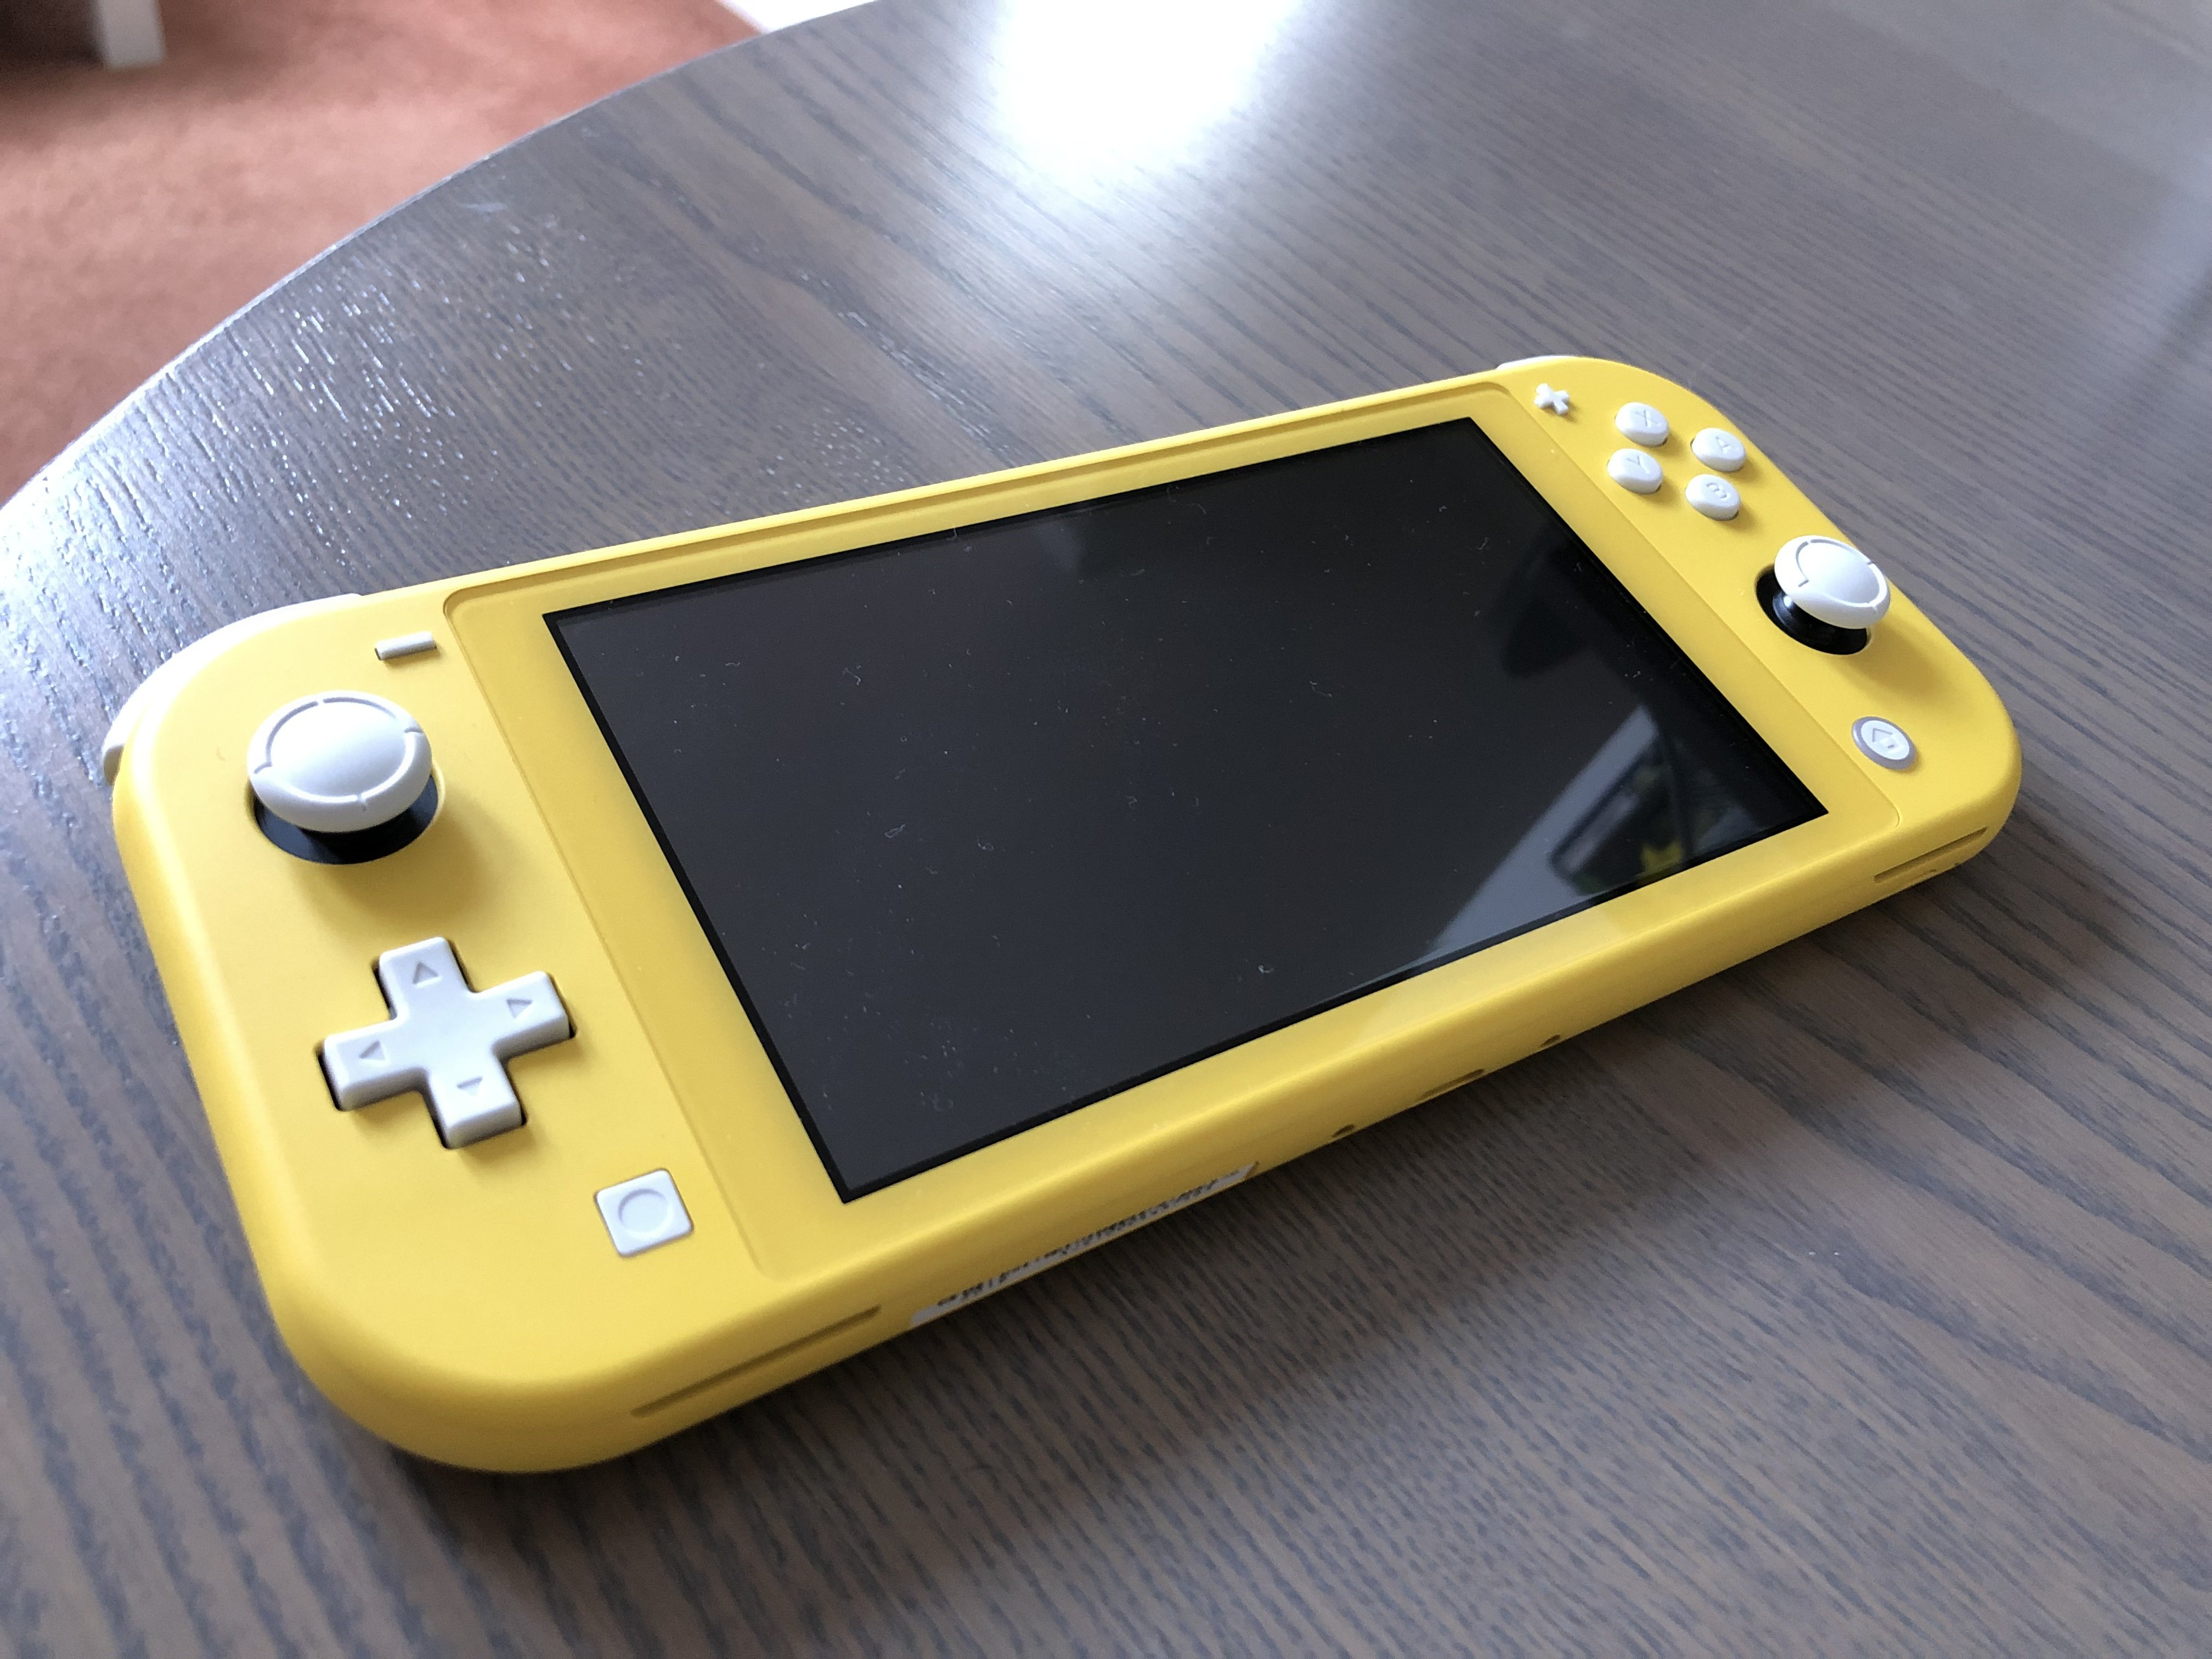 switch lite as second controller